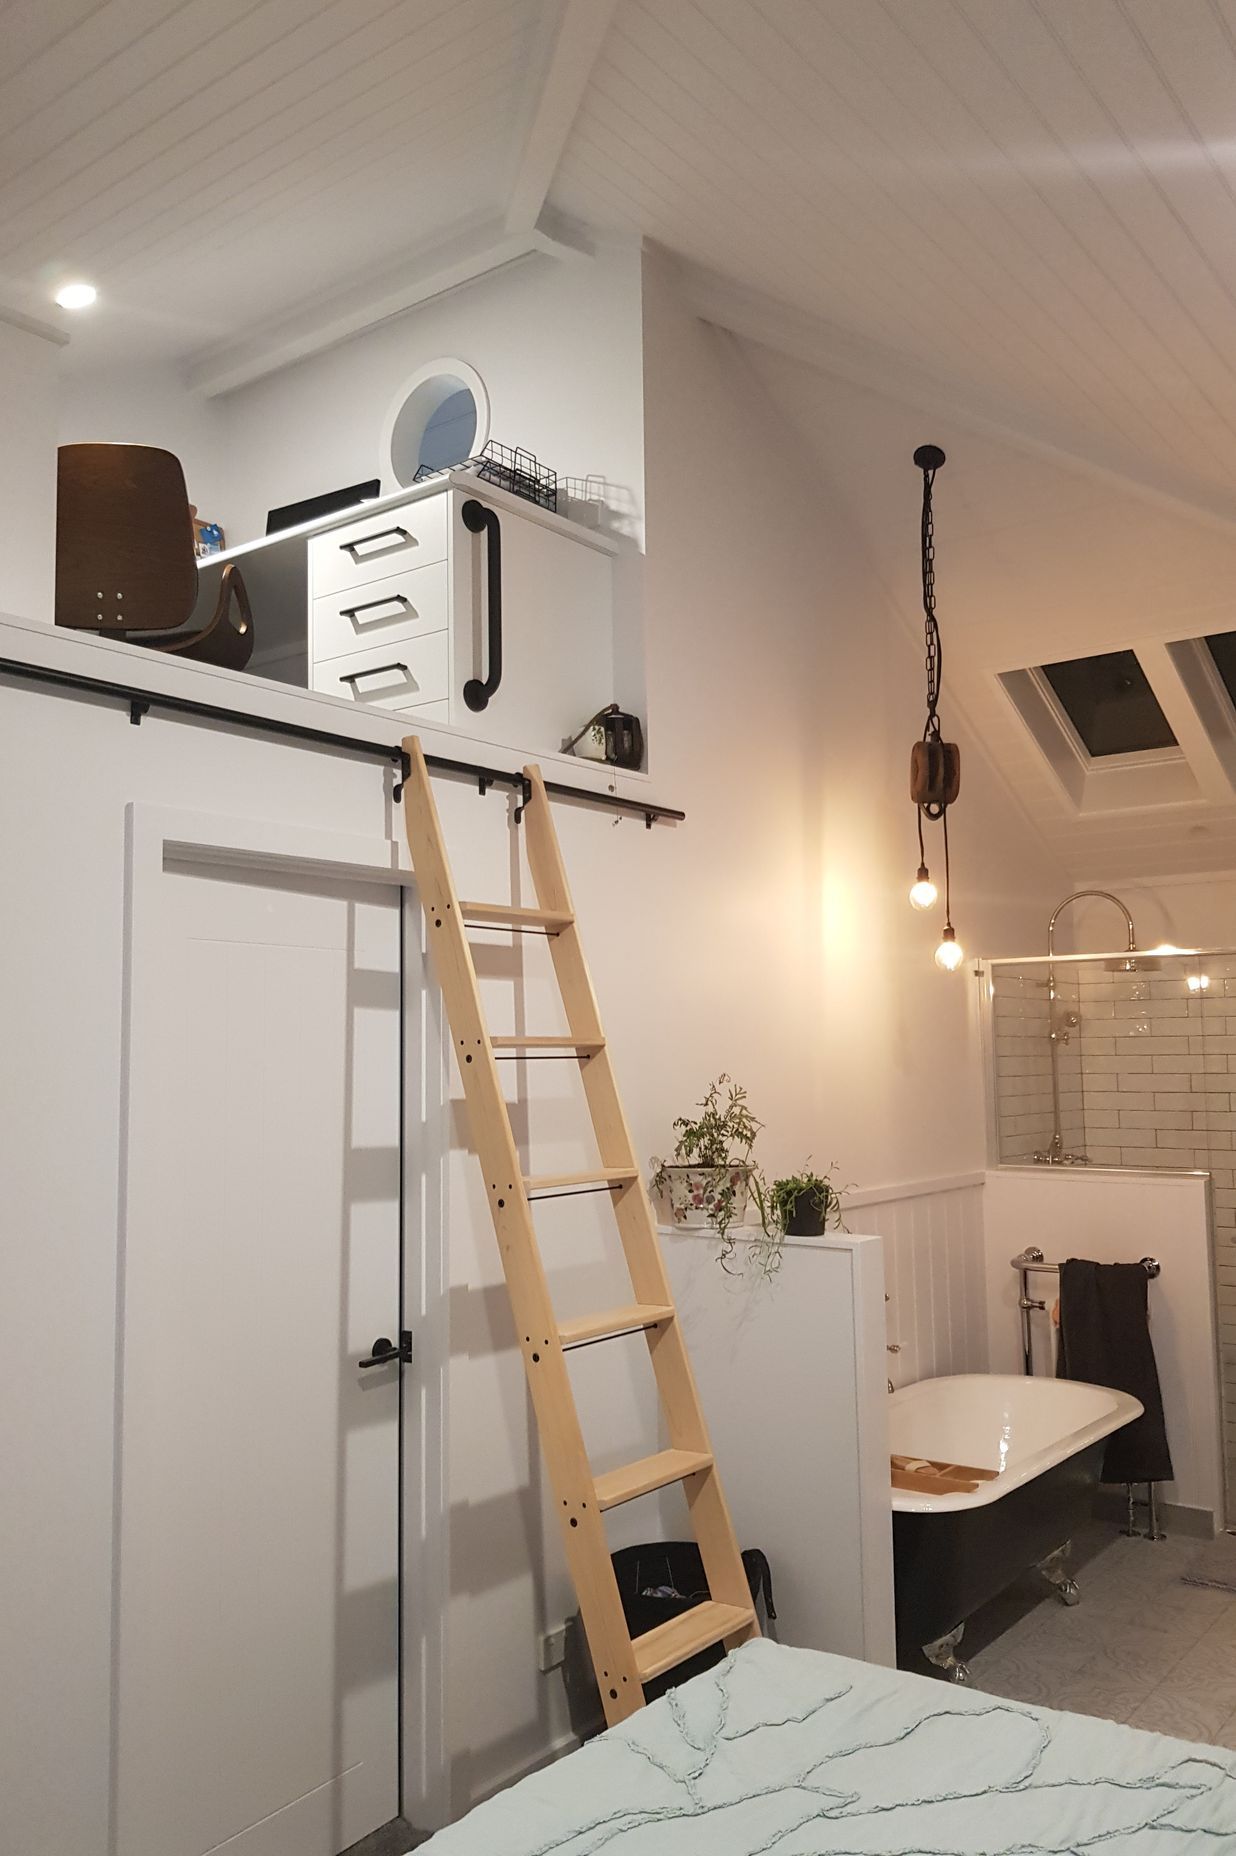 Installing a ladder means double-heights spaces can be utilised.